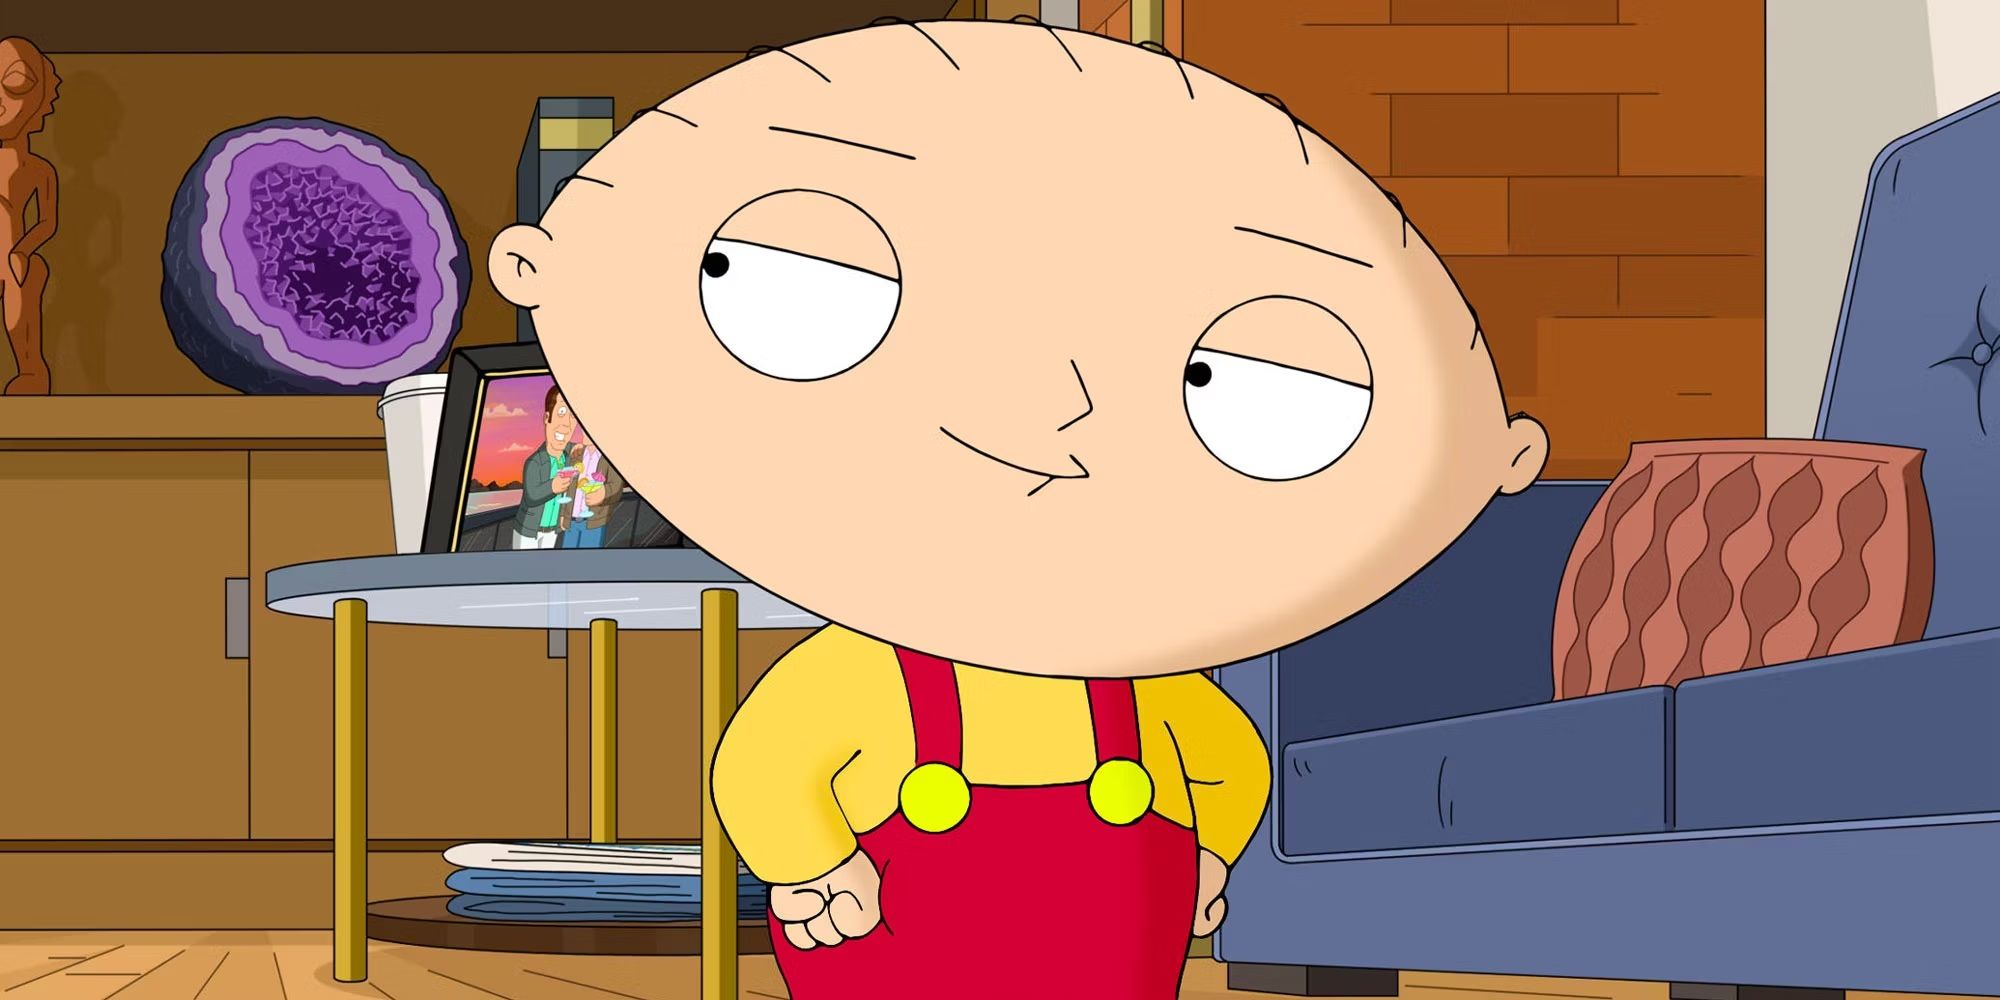 The Astonishing Family Guy Characters Capable of Fully Grasping Stewie